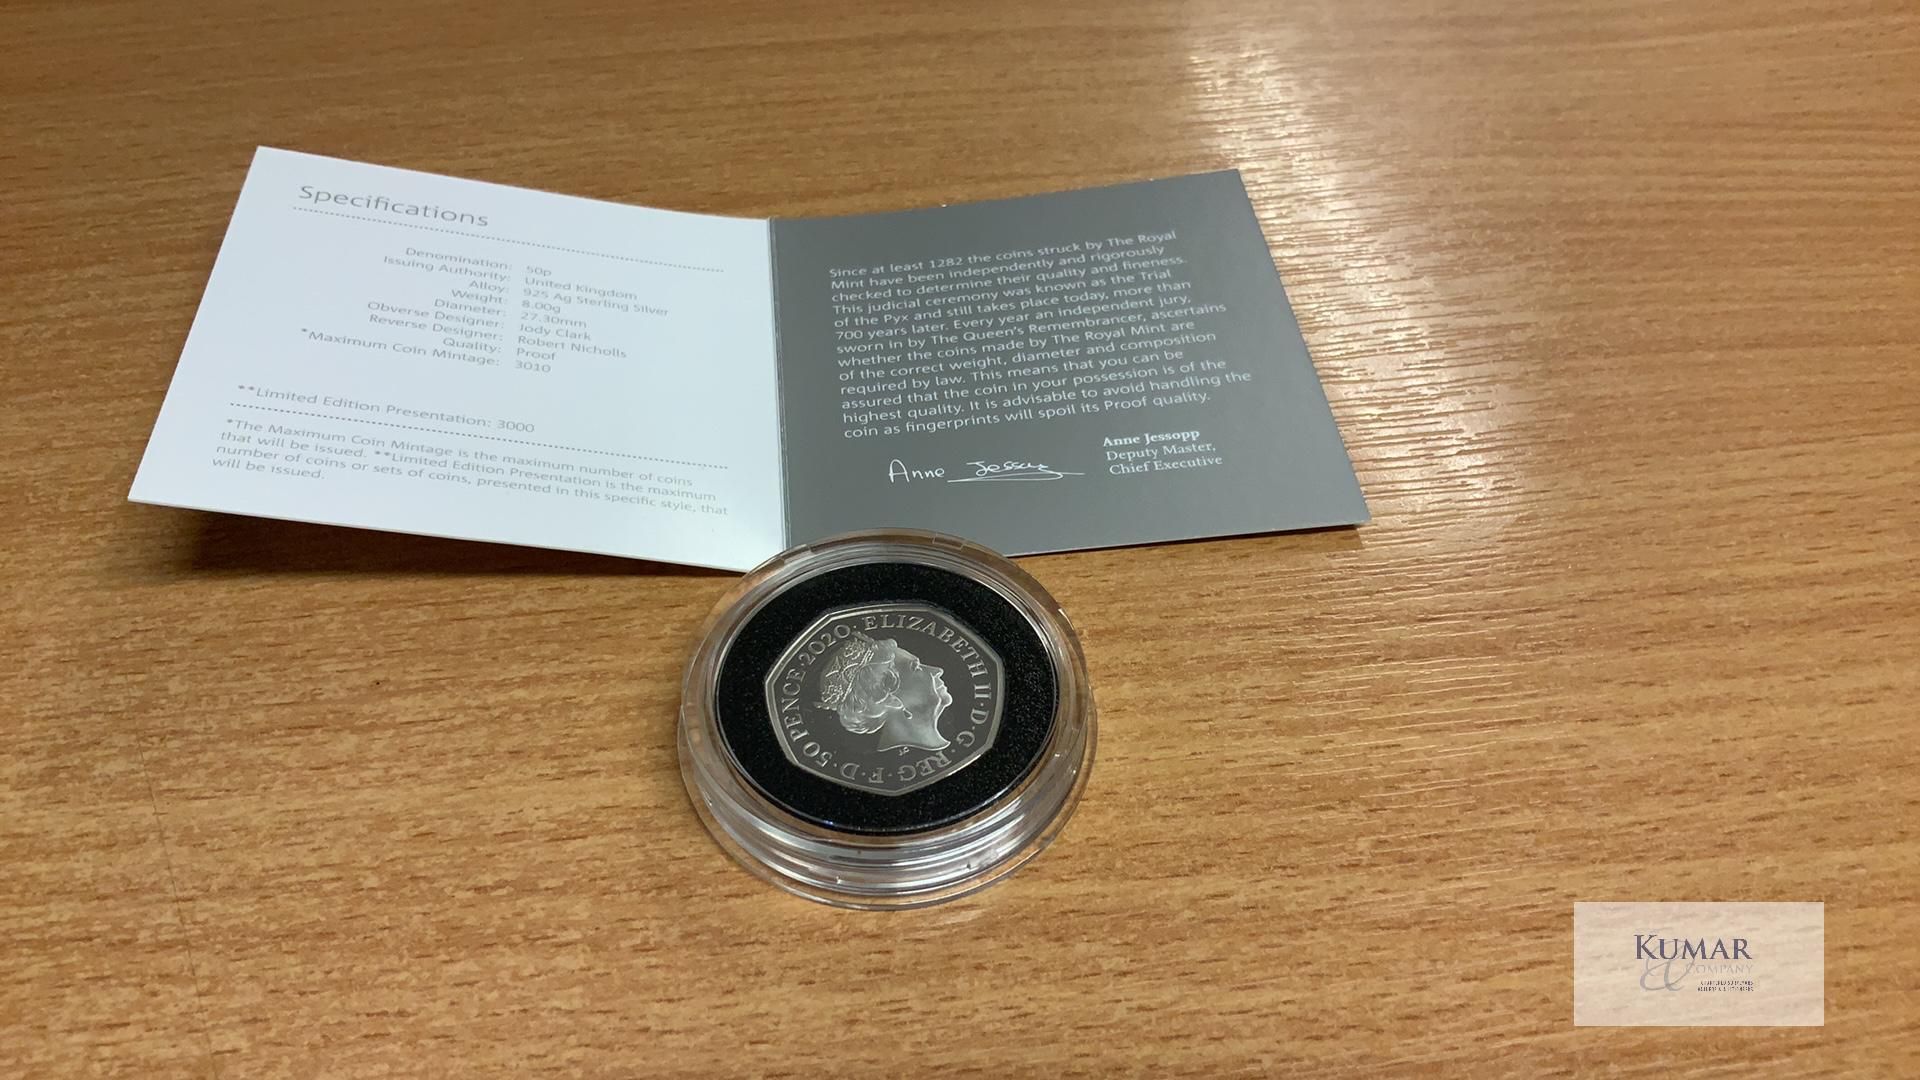 The Royal Mint Coin- Tales of the Earth - The Dinosauria Collection Hylaeosaurus 2020 UK 50p - Image 3 of 4